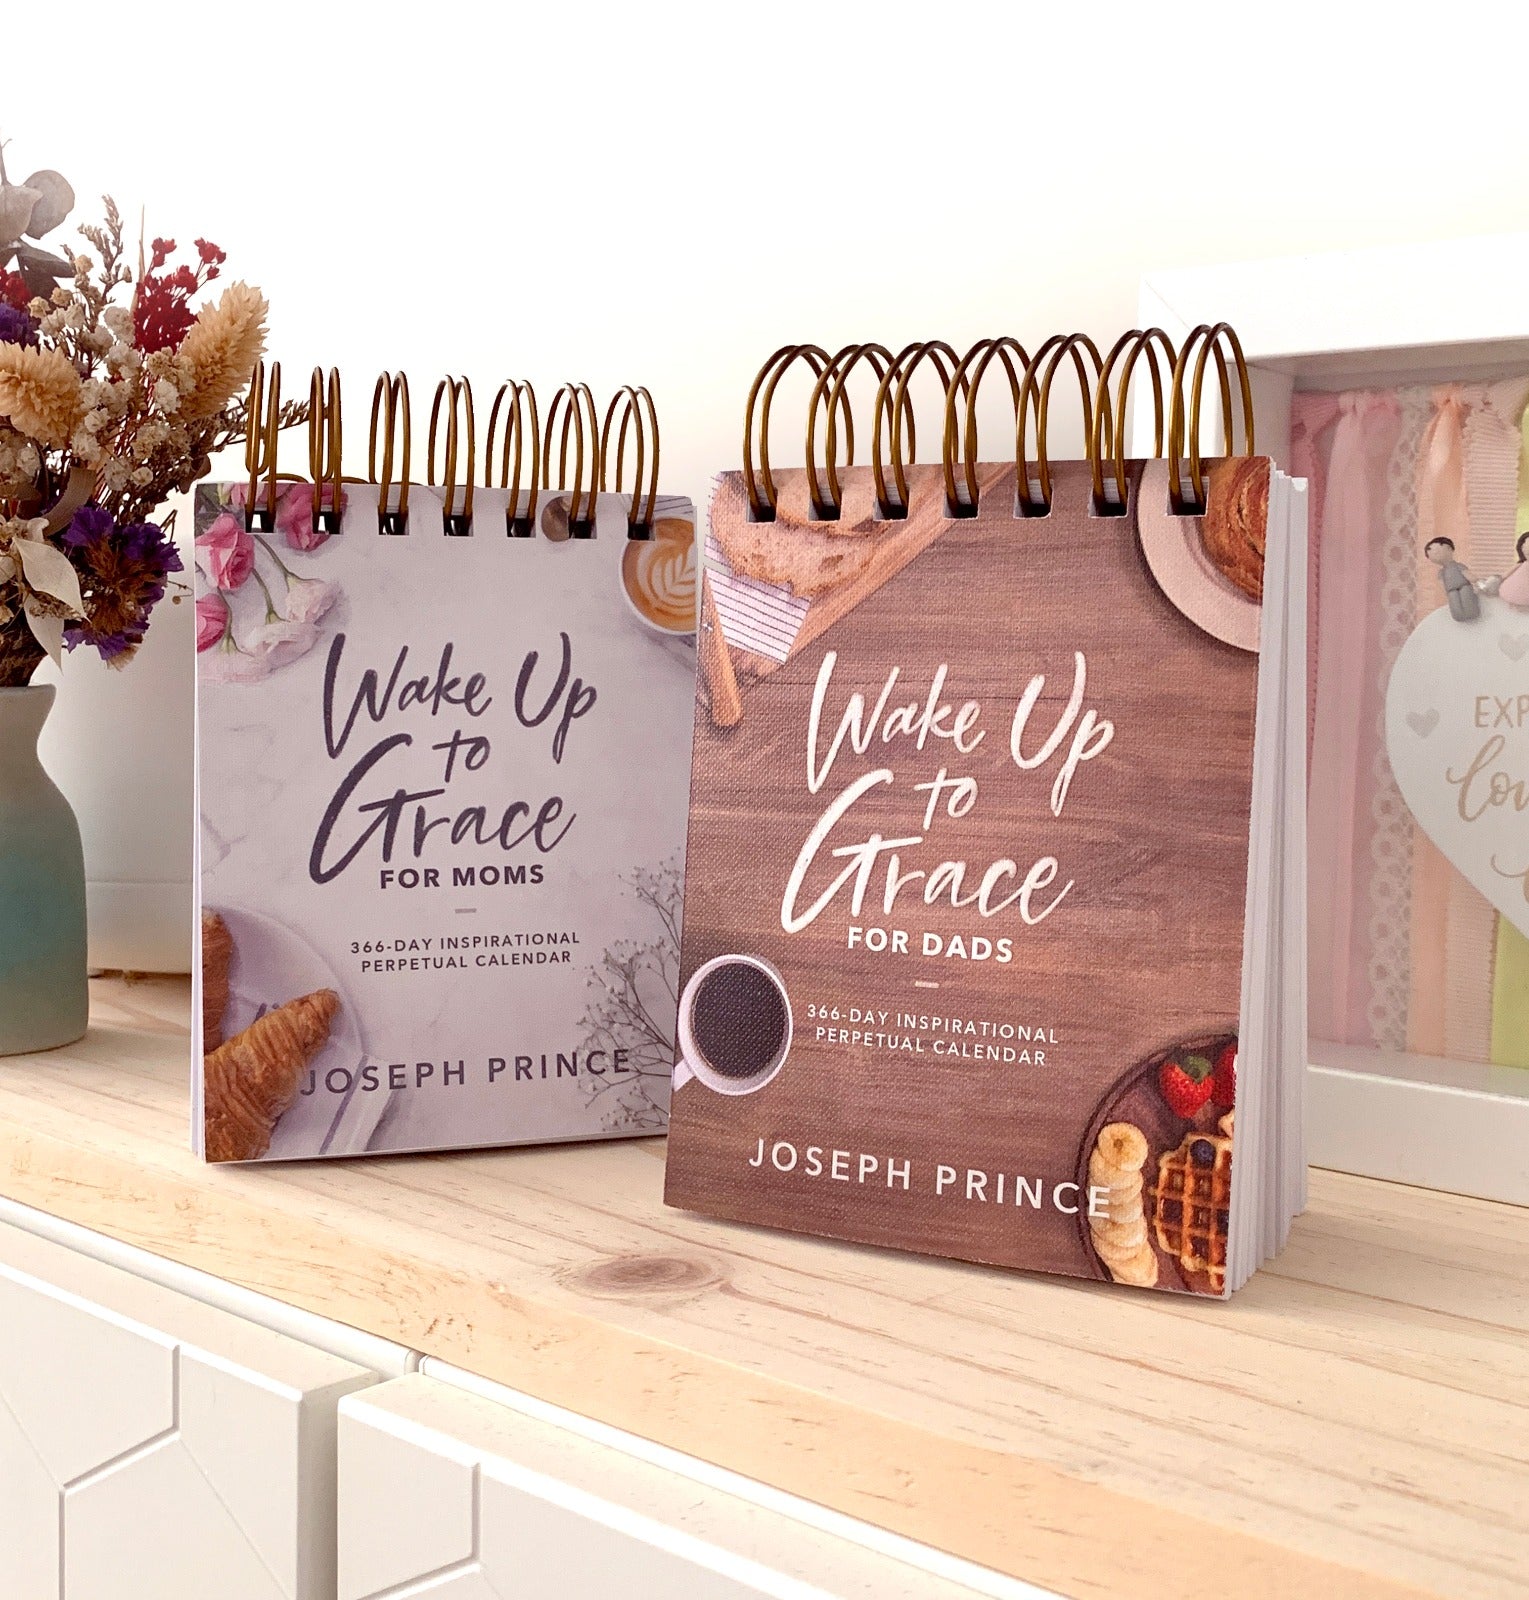 Wake Up To Grace For Moms —366-Day Inspirational Perpetual Calendar